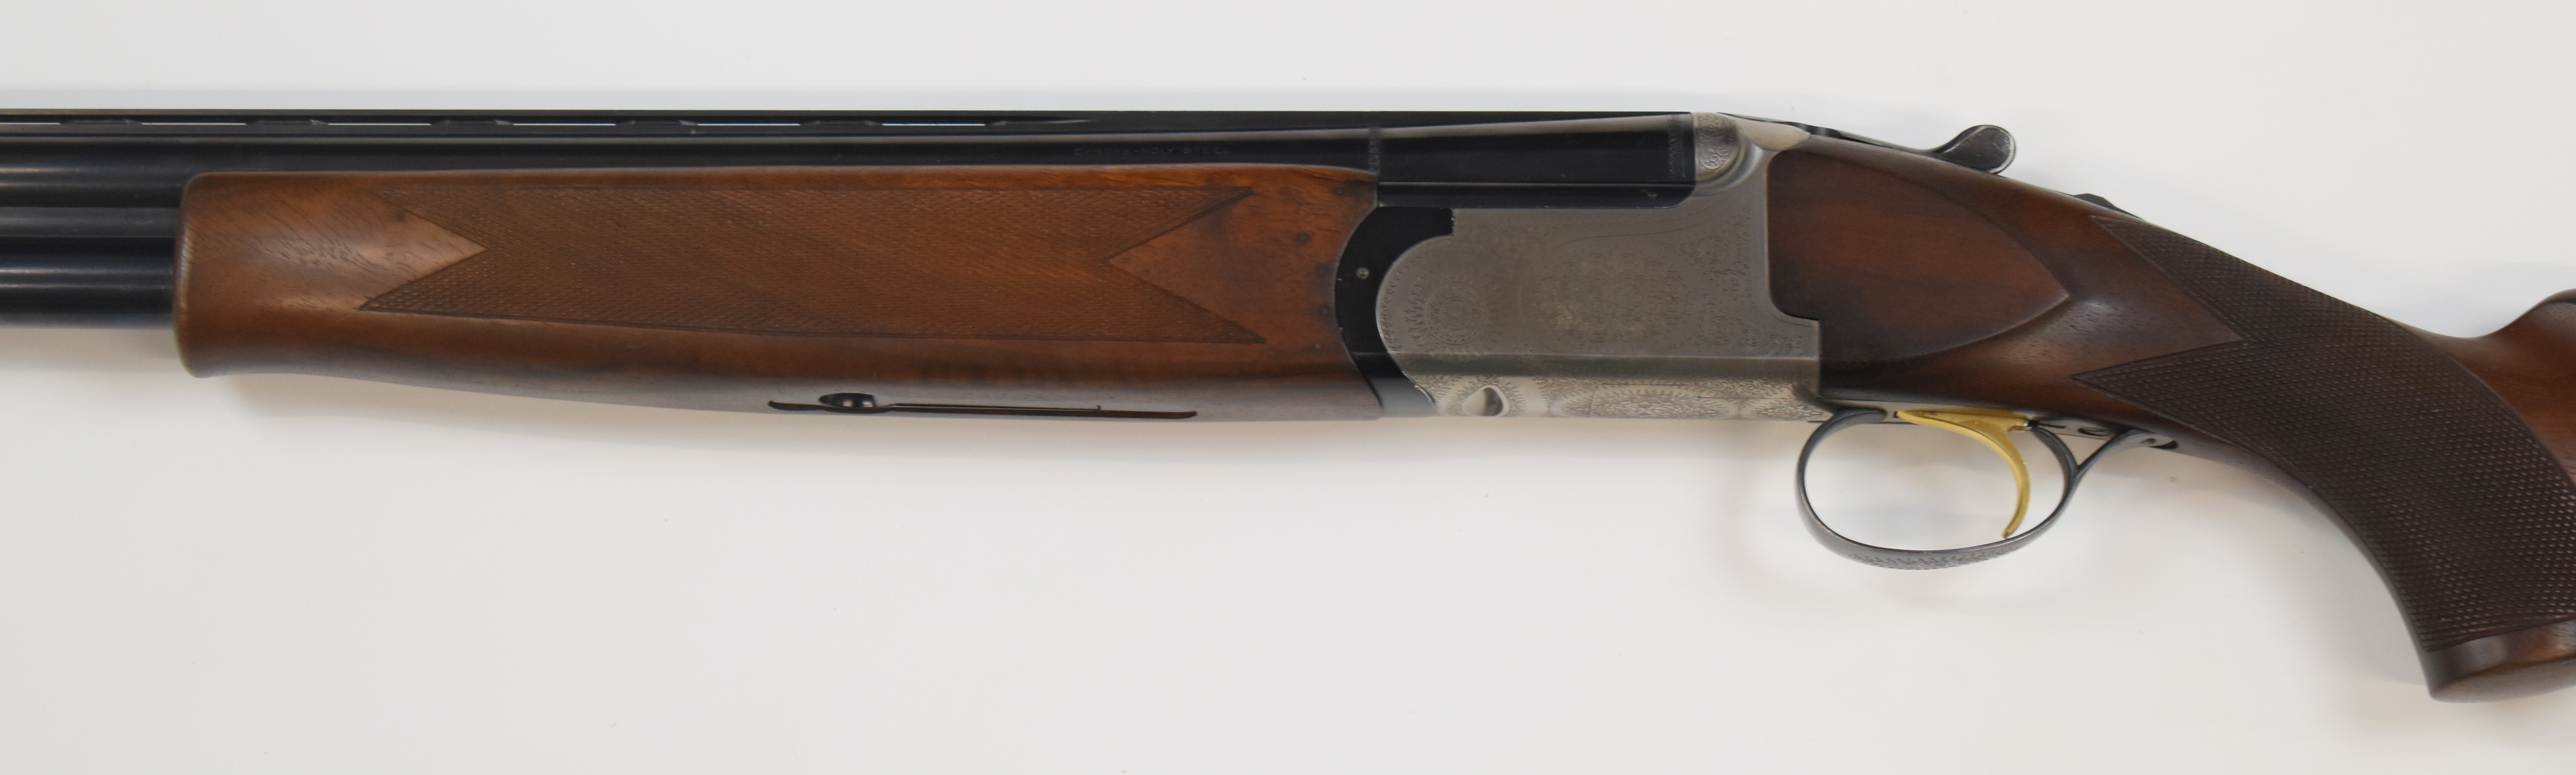 Parker-Hale 12 bore over and under ejector shotgun with named and engraved lock, engraved trigger - Image 8 of 10